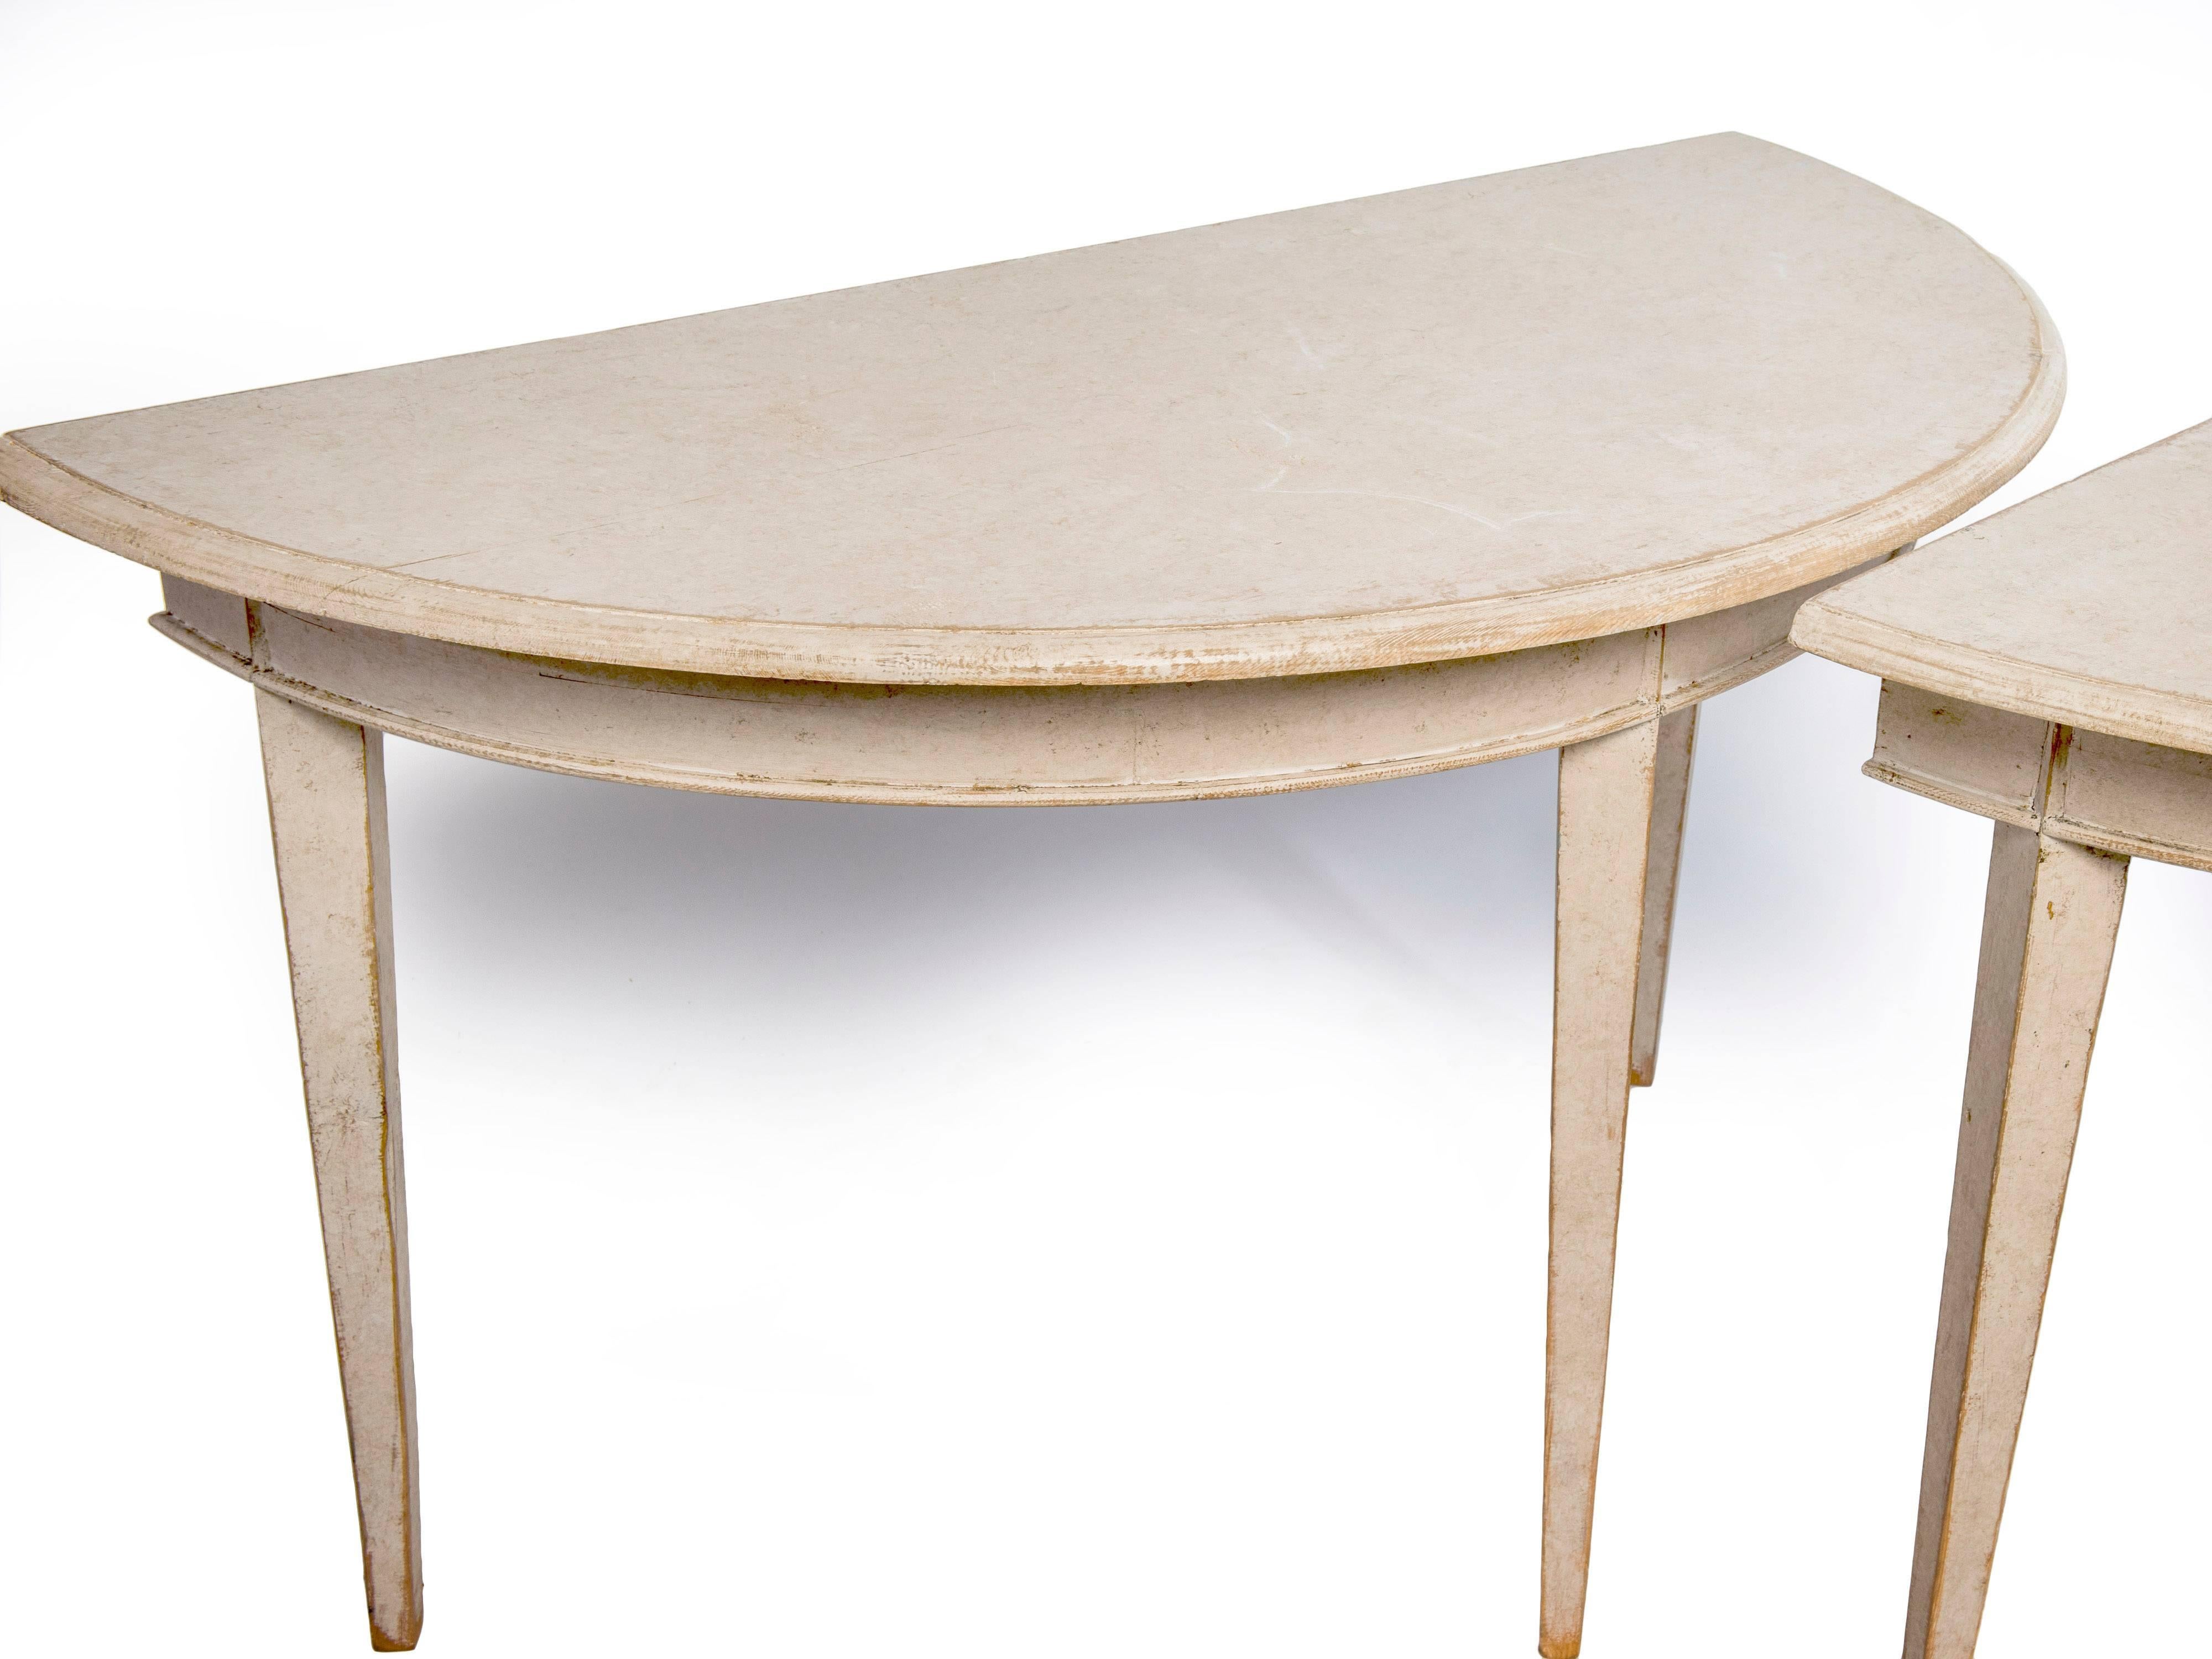 Swedish Pair of Gustavian Demilune Tables Scraped to Their Original Color